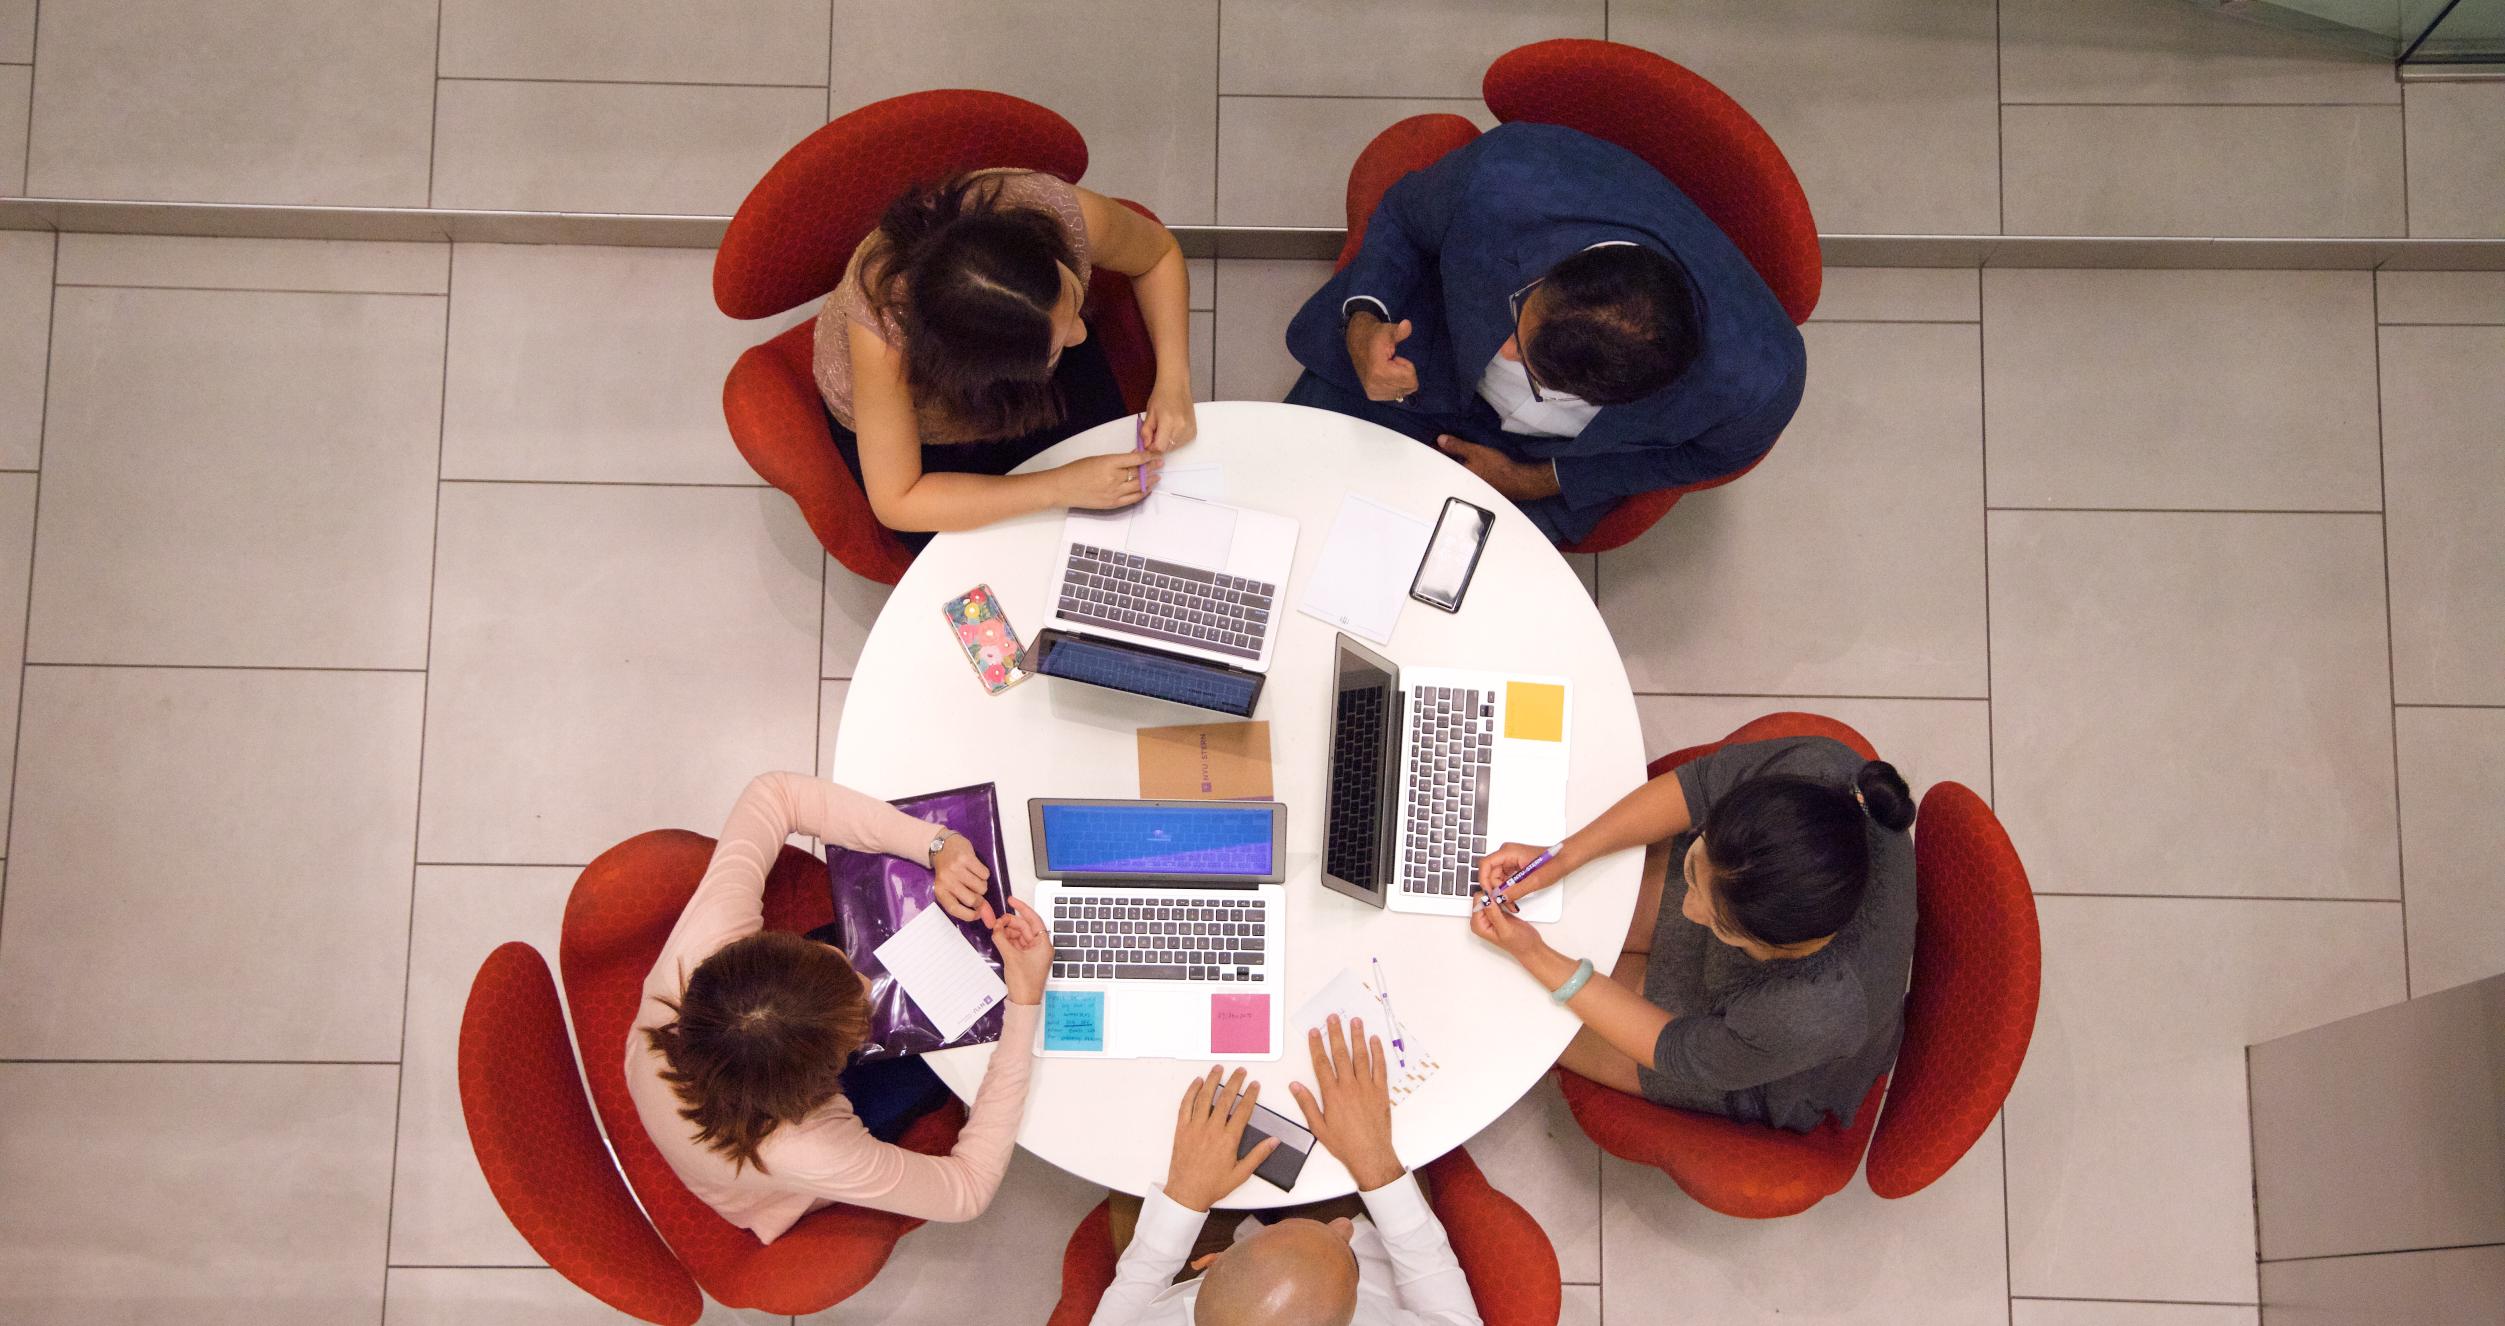 Students around a circular table with laptops